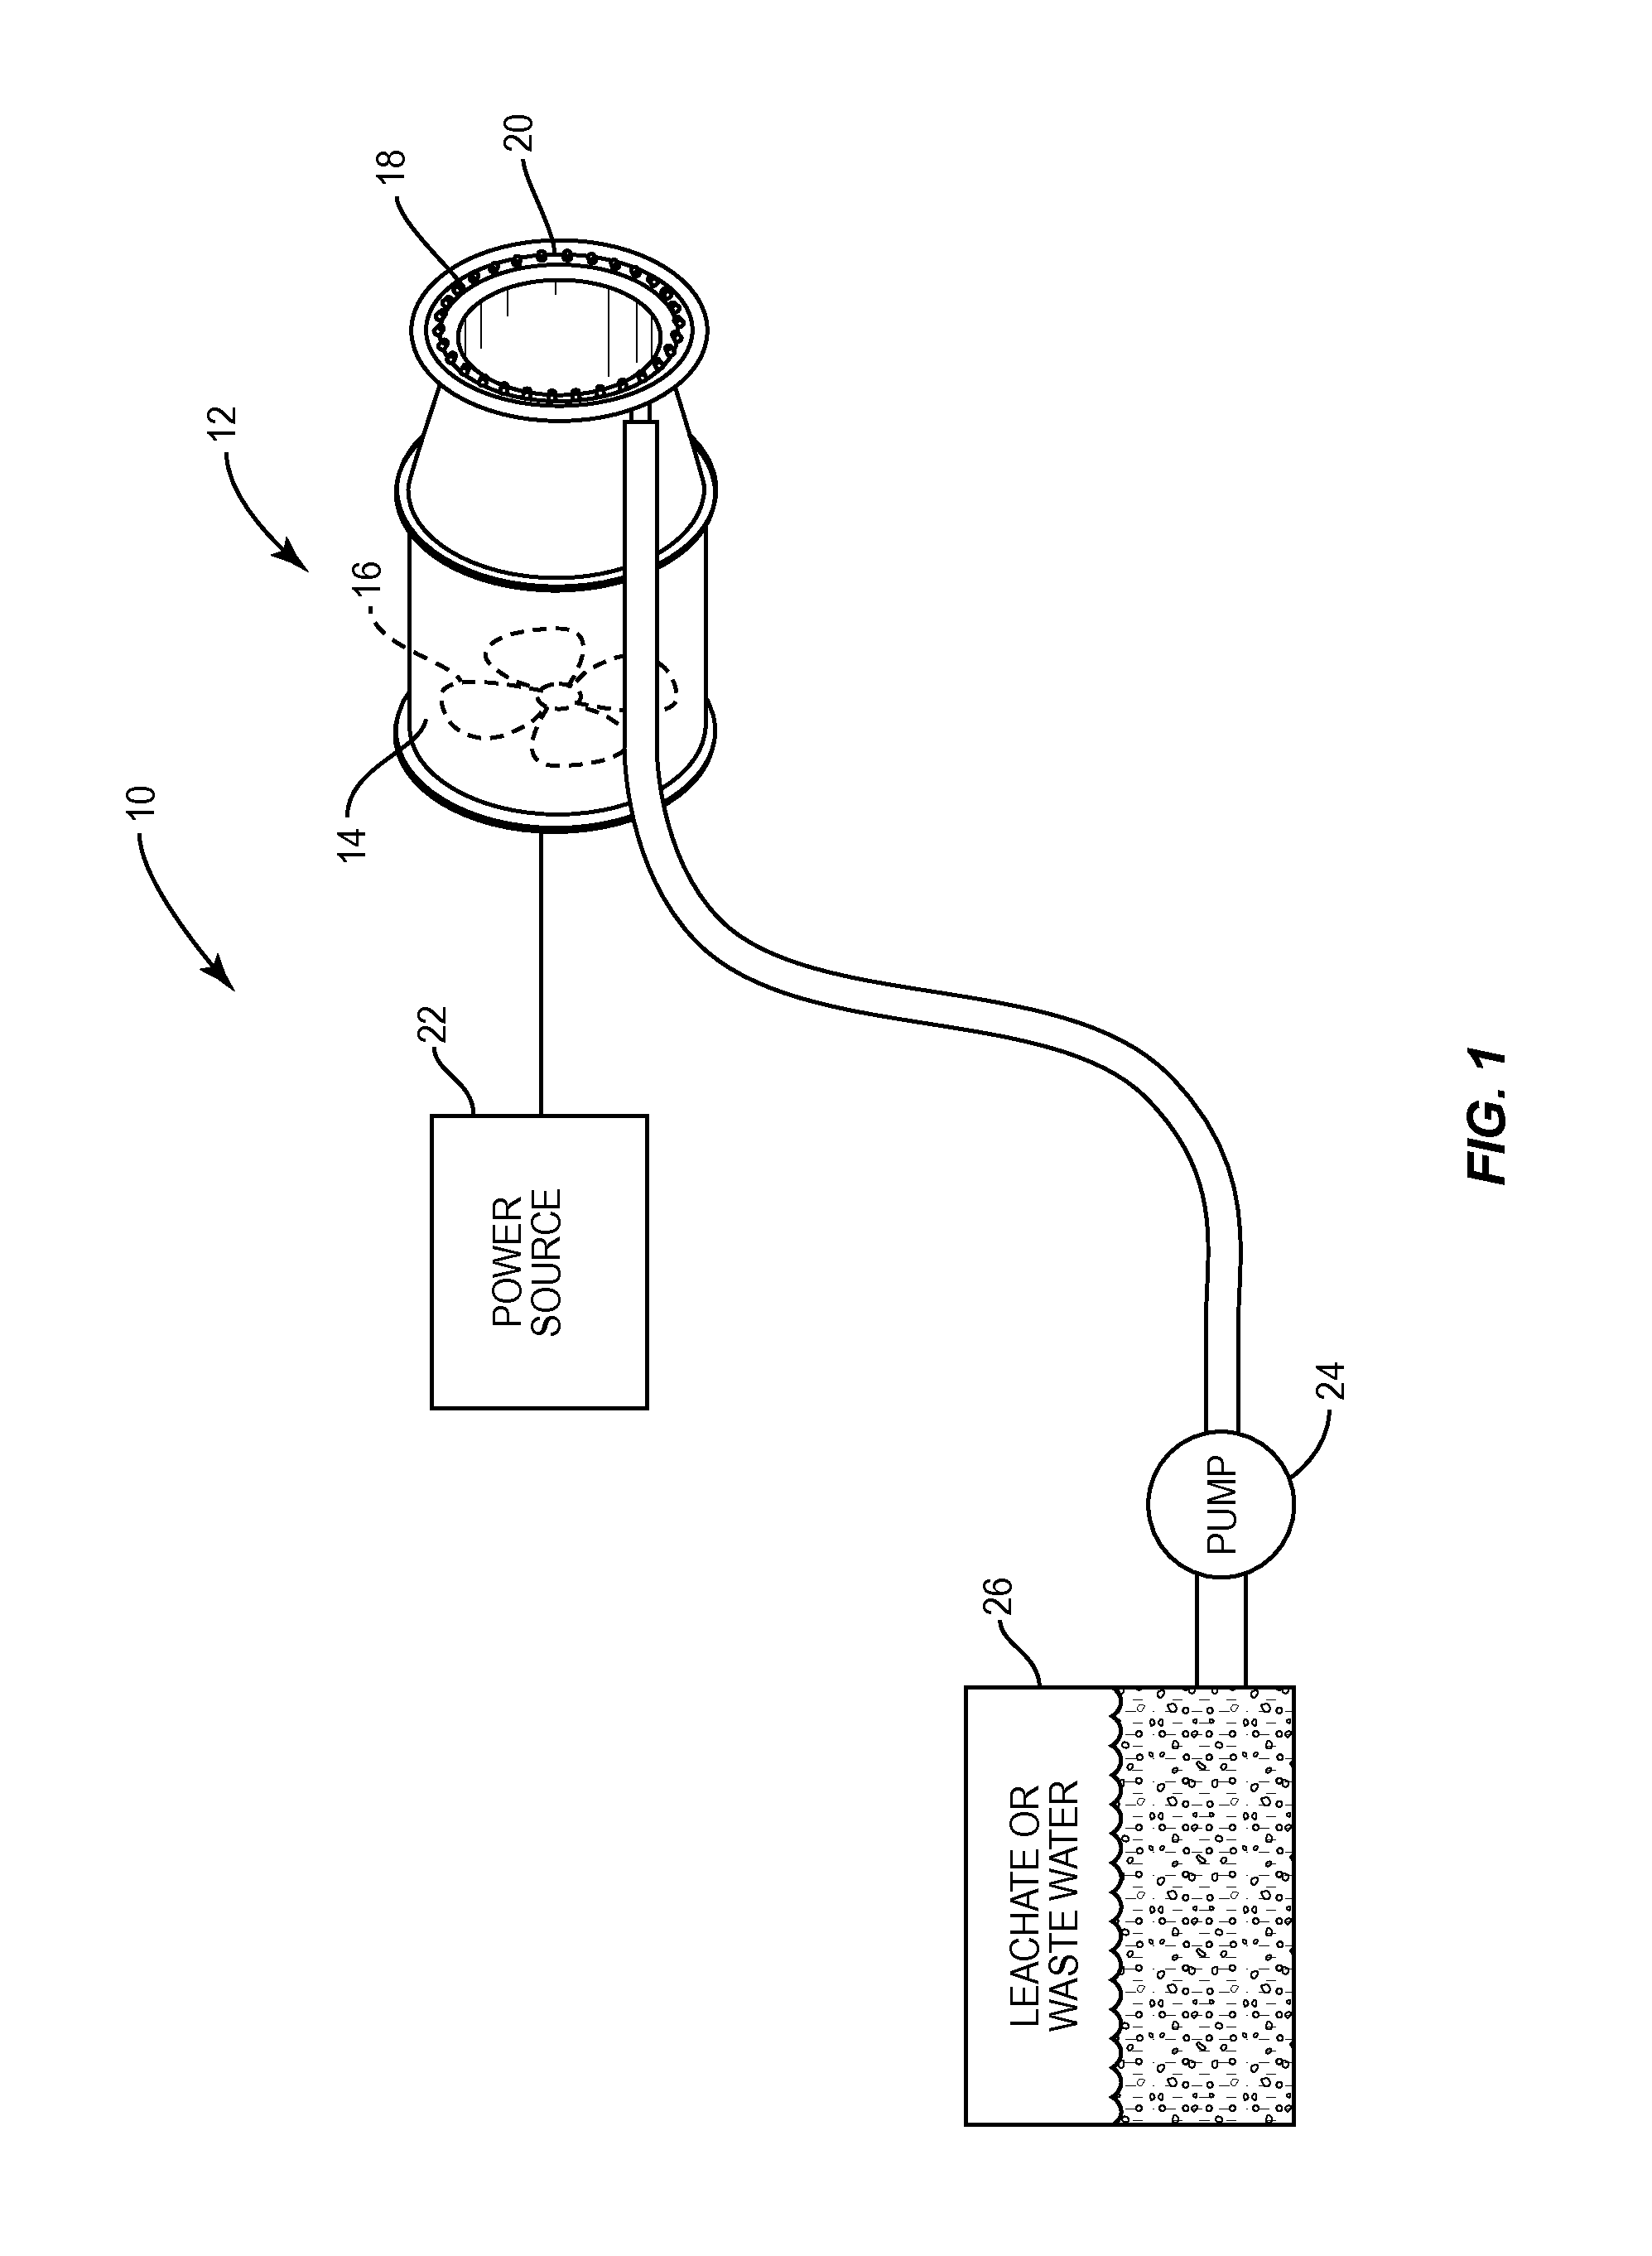 System and method for disposing of leachate and wastewater